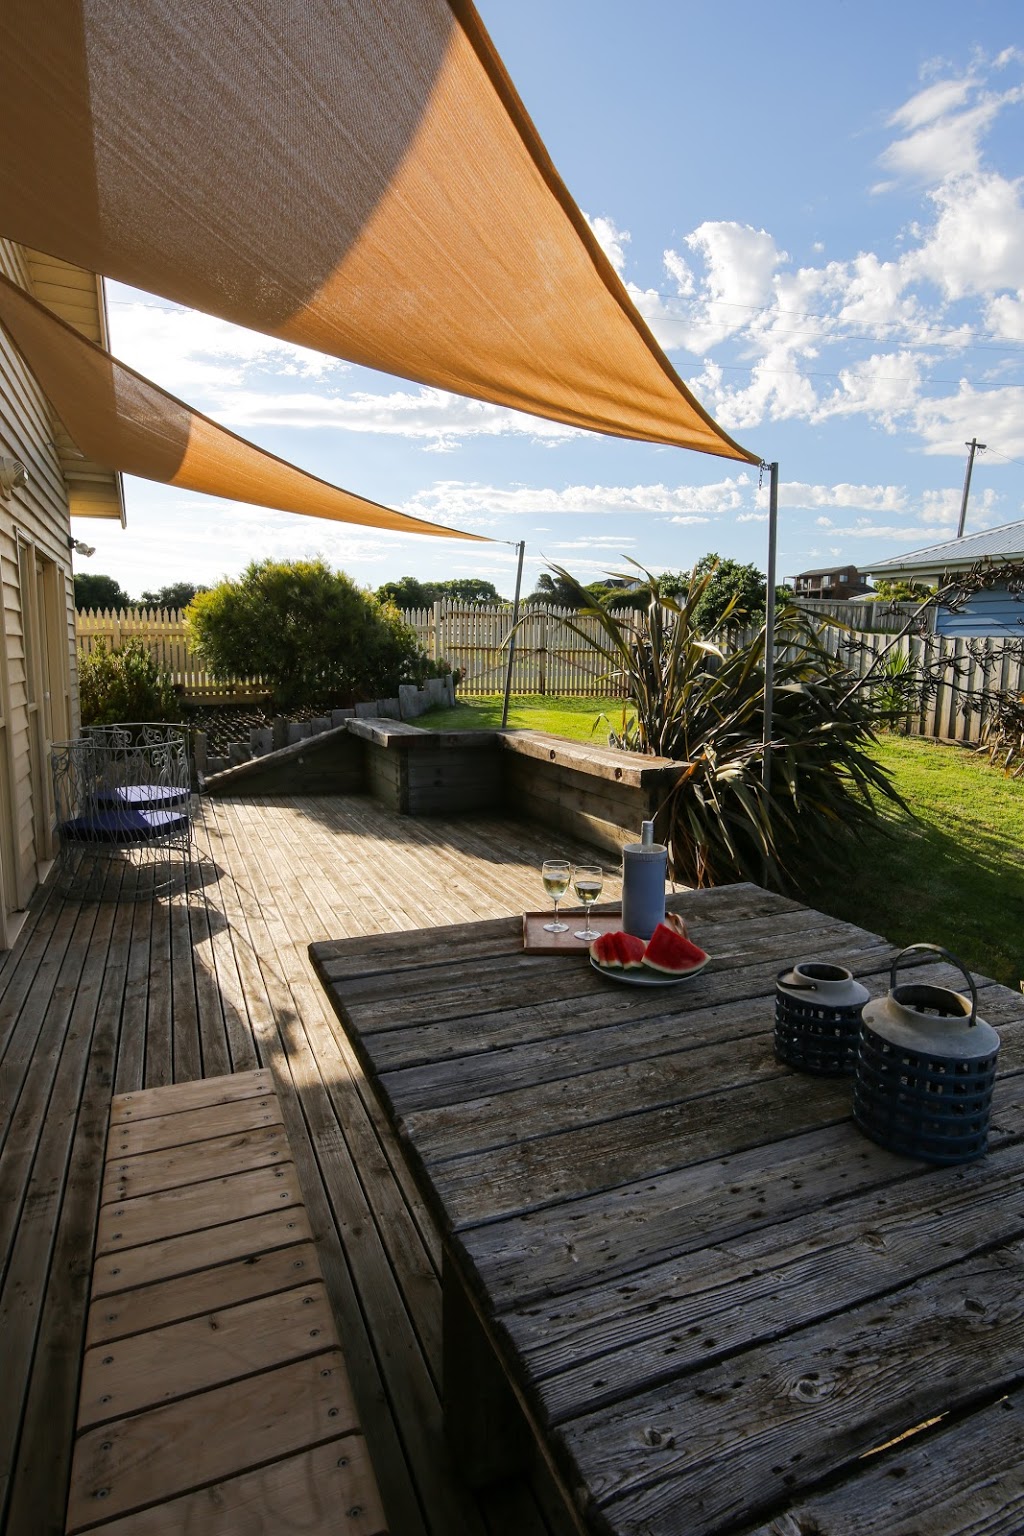 Catherine Normane Holiday House | lodging | 27 Philip St, Port Fairy VIC 3284, Australia | 0438017225 OR +61 438 017 225